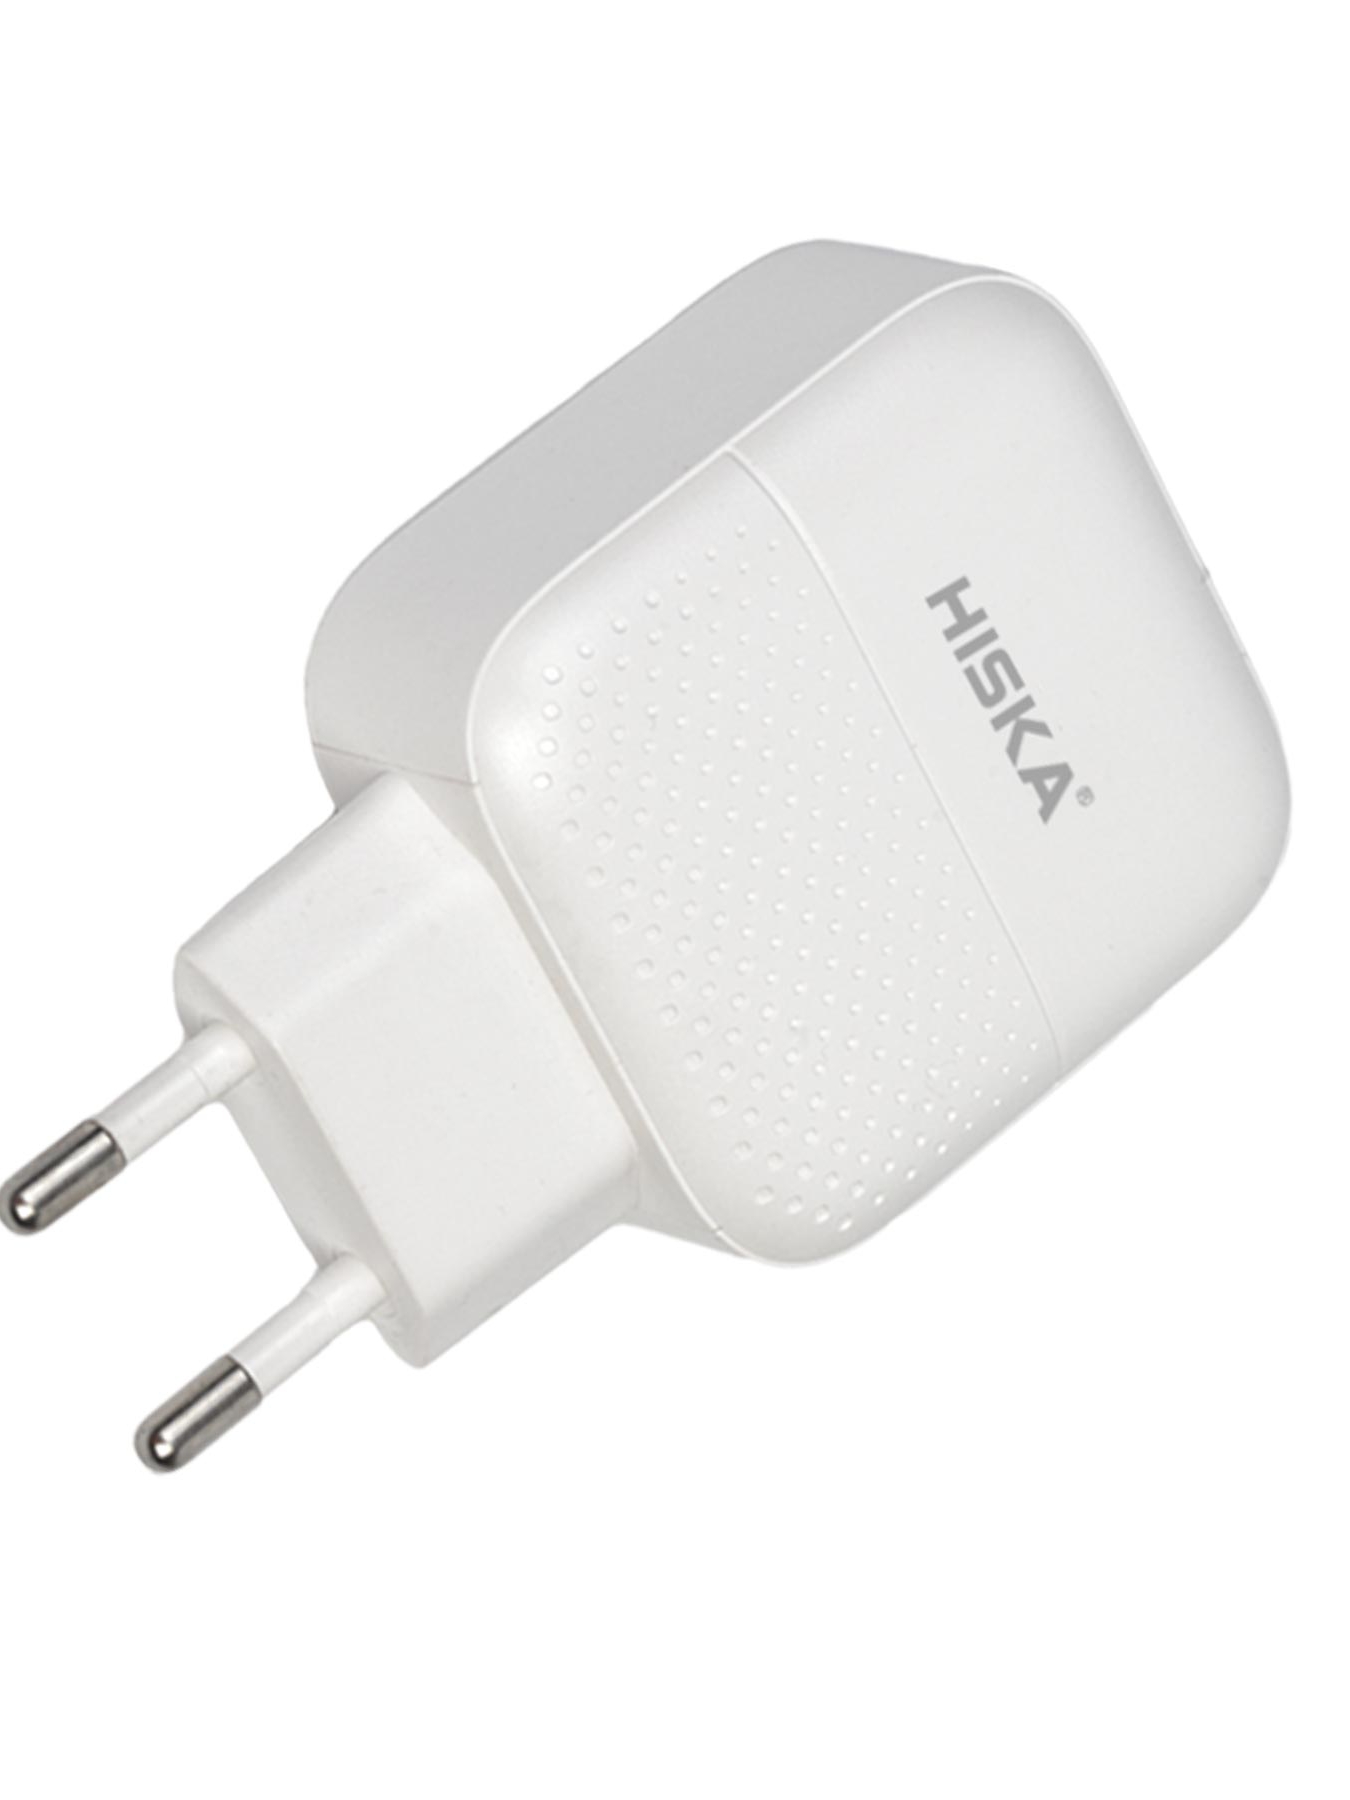 Wall charger H-111Q chargers